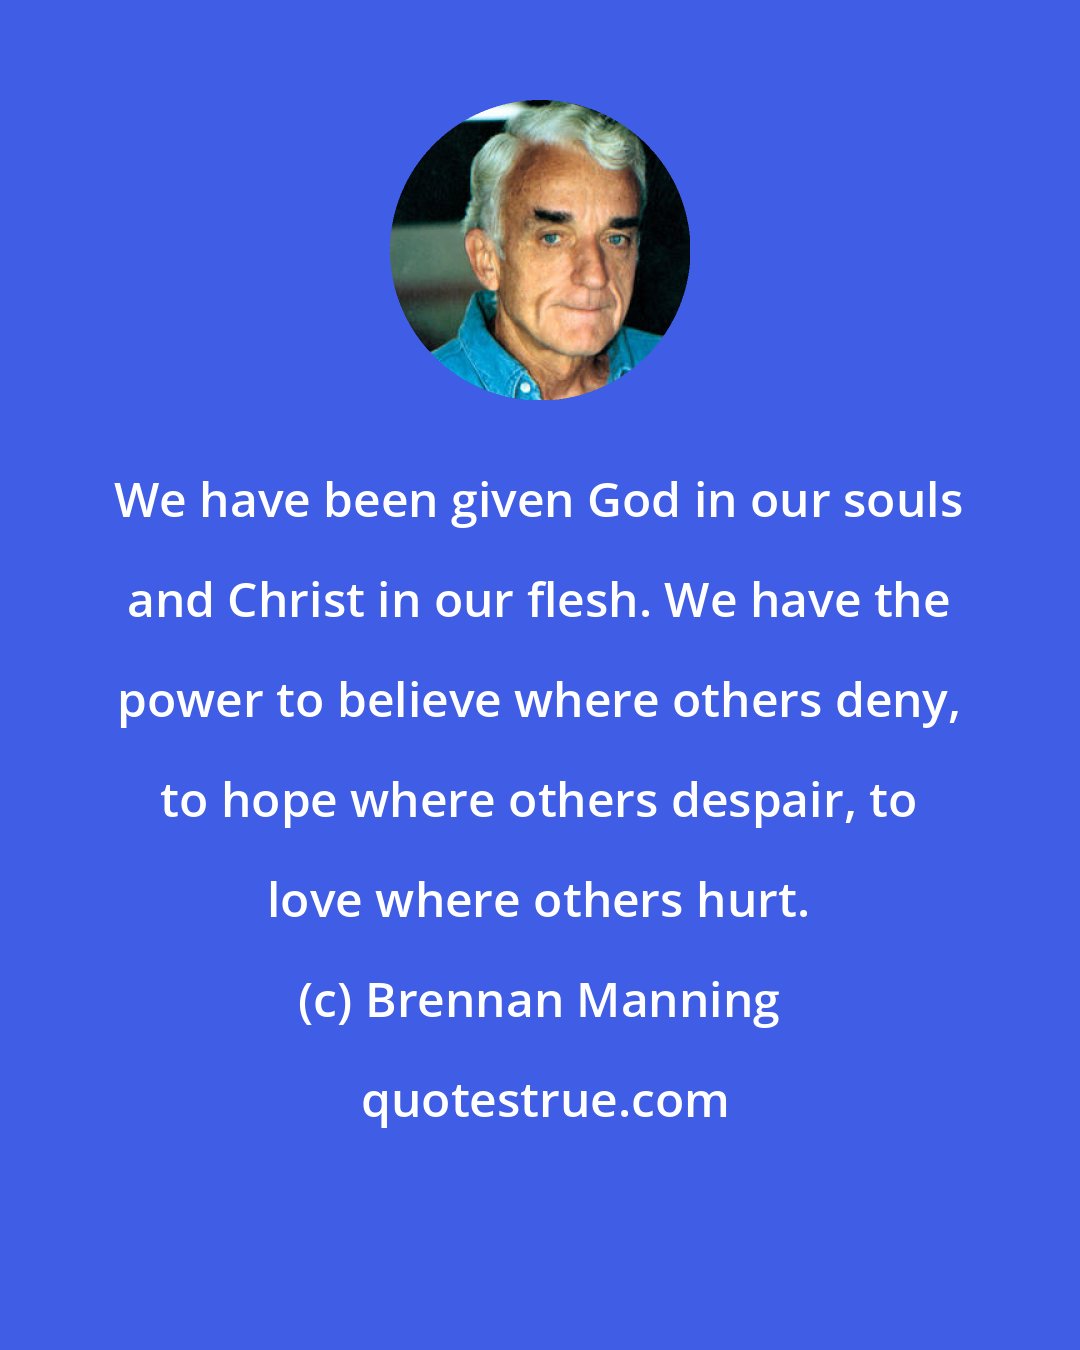 Brennan Manning: We have been given God in our souls and Christ in our flesh. We have the power to believe where others deny, to hope where others despair, to love where others hurt.